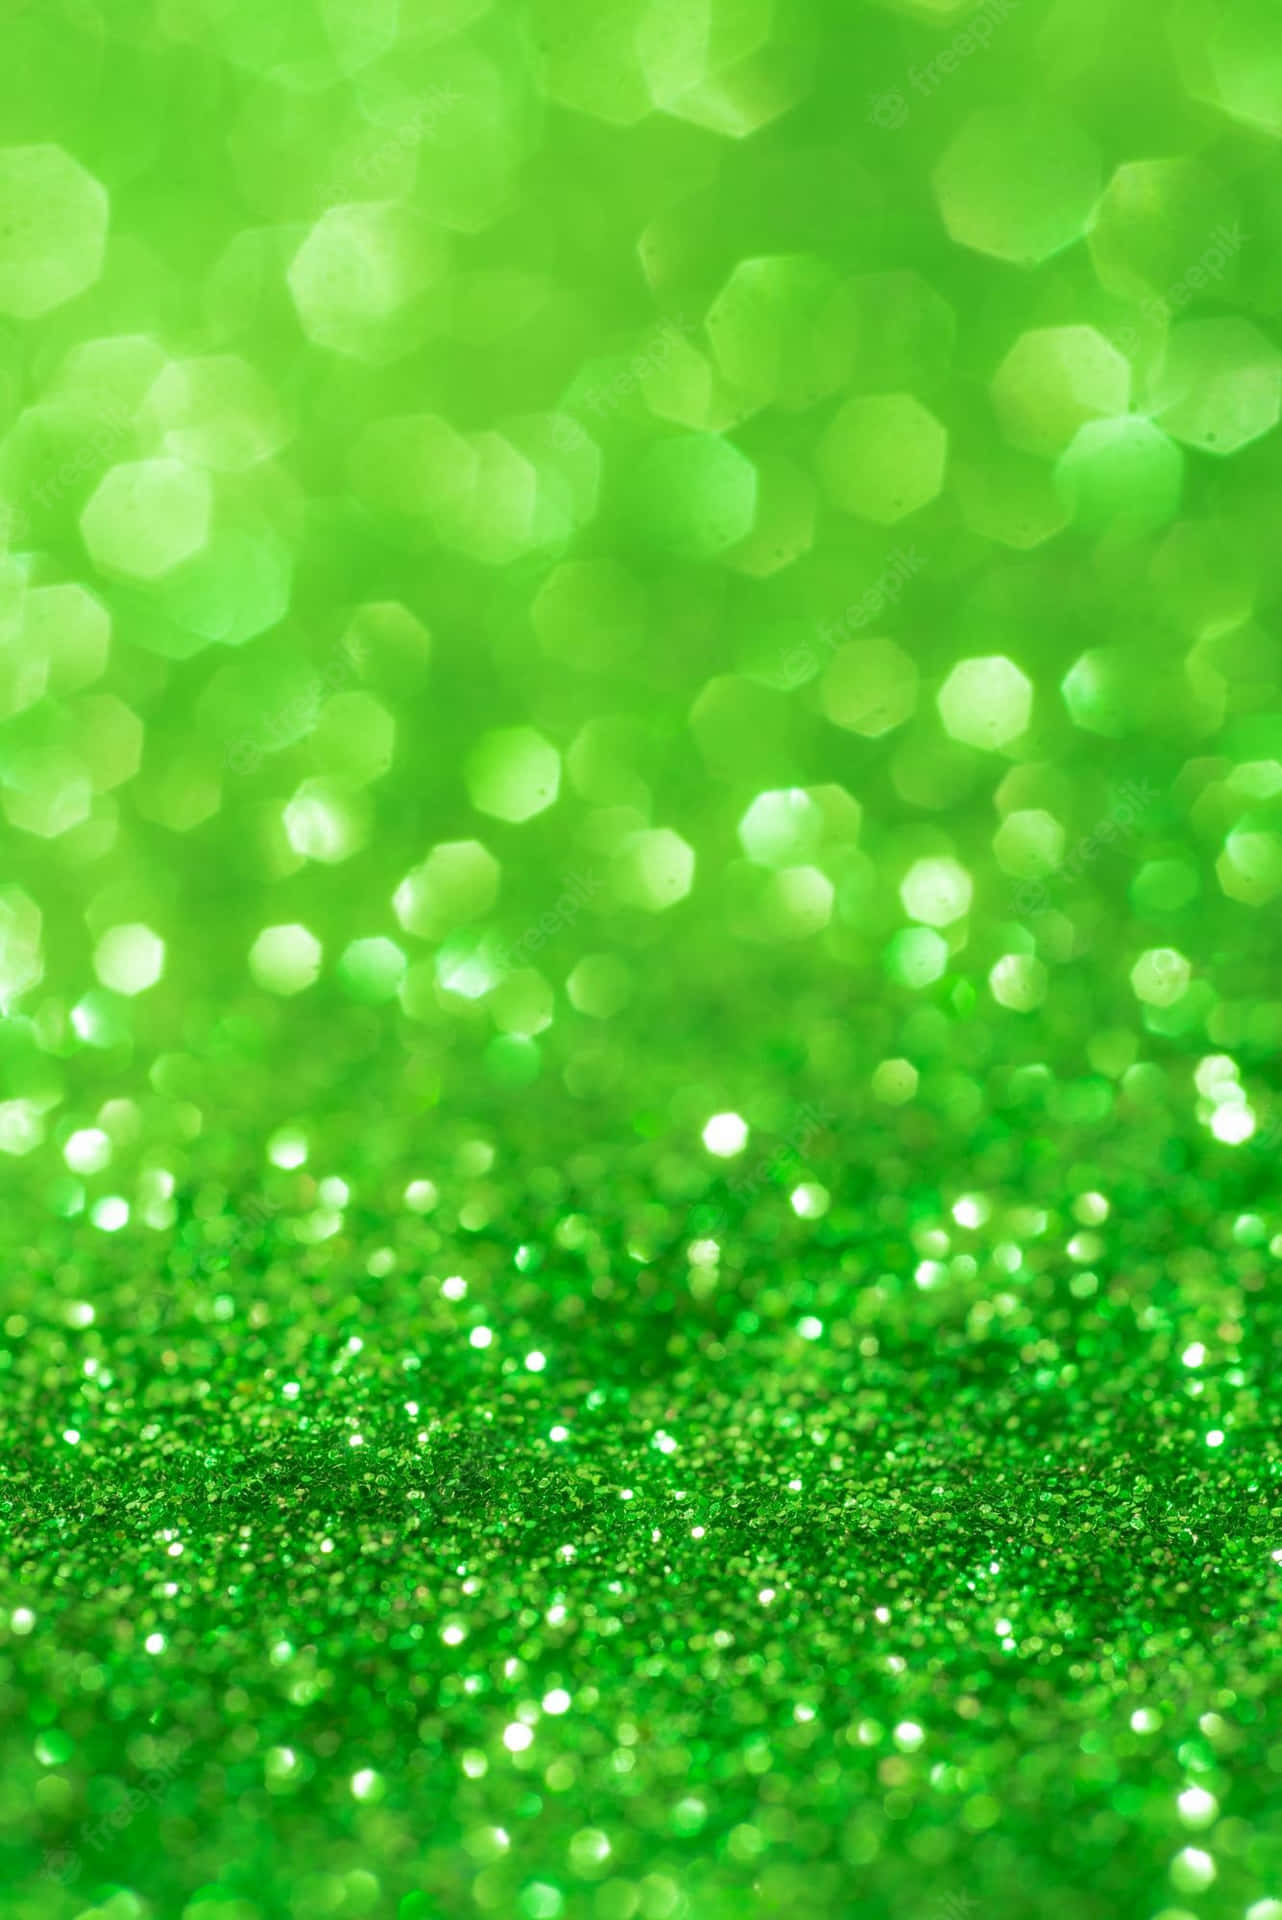 Glitter Wallpaper Shiny Green Texture For Your Personal Holiday Design  Stock Photo  Download Image Now  iStock